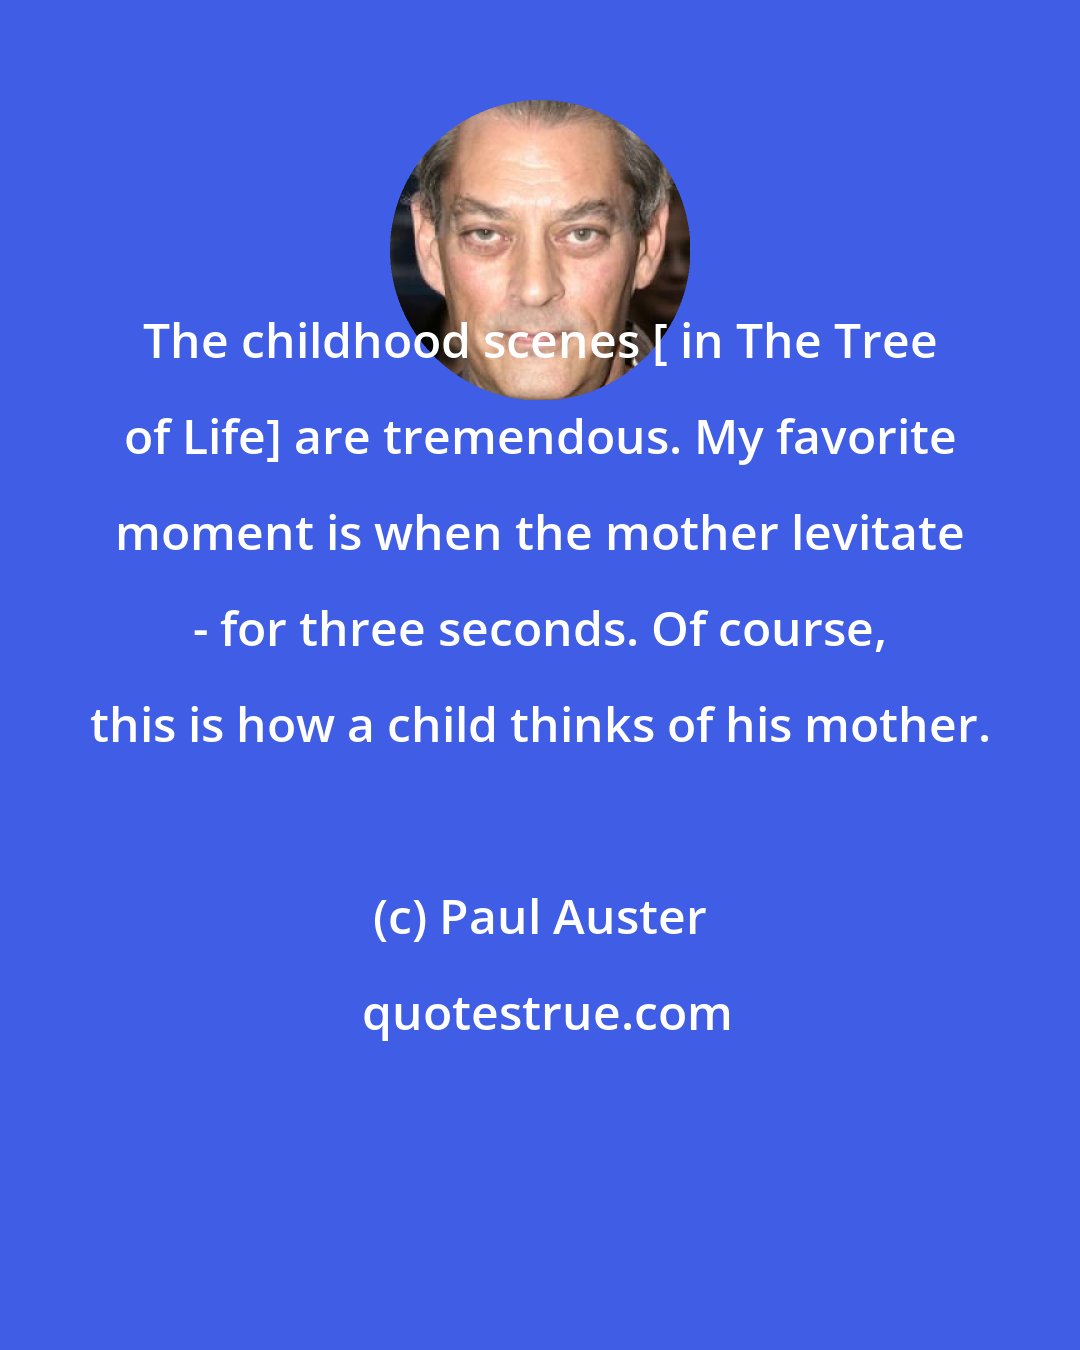 Paul Auster: The childhood scenes [ in The Tree of Life] are tremendous. My favorite moment is when the mother levitate - for three seconds. Of course, this is how a child thinks of his mother.